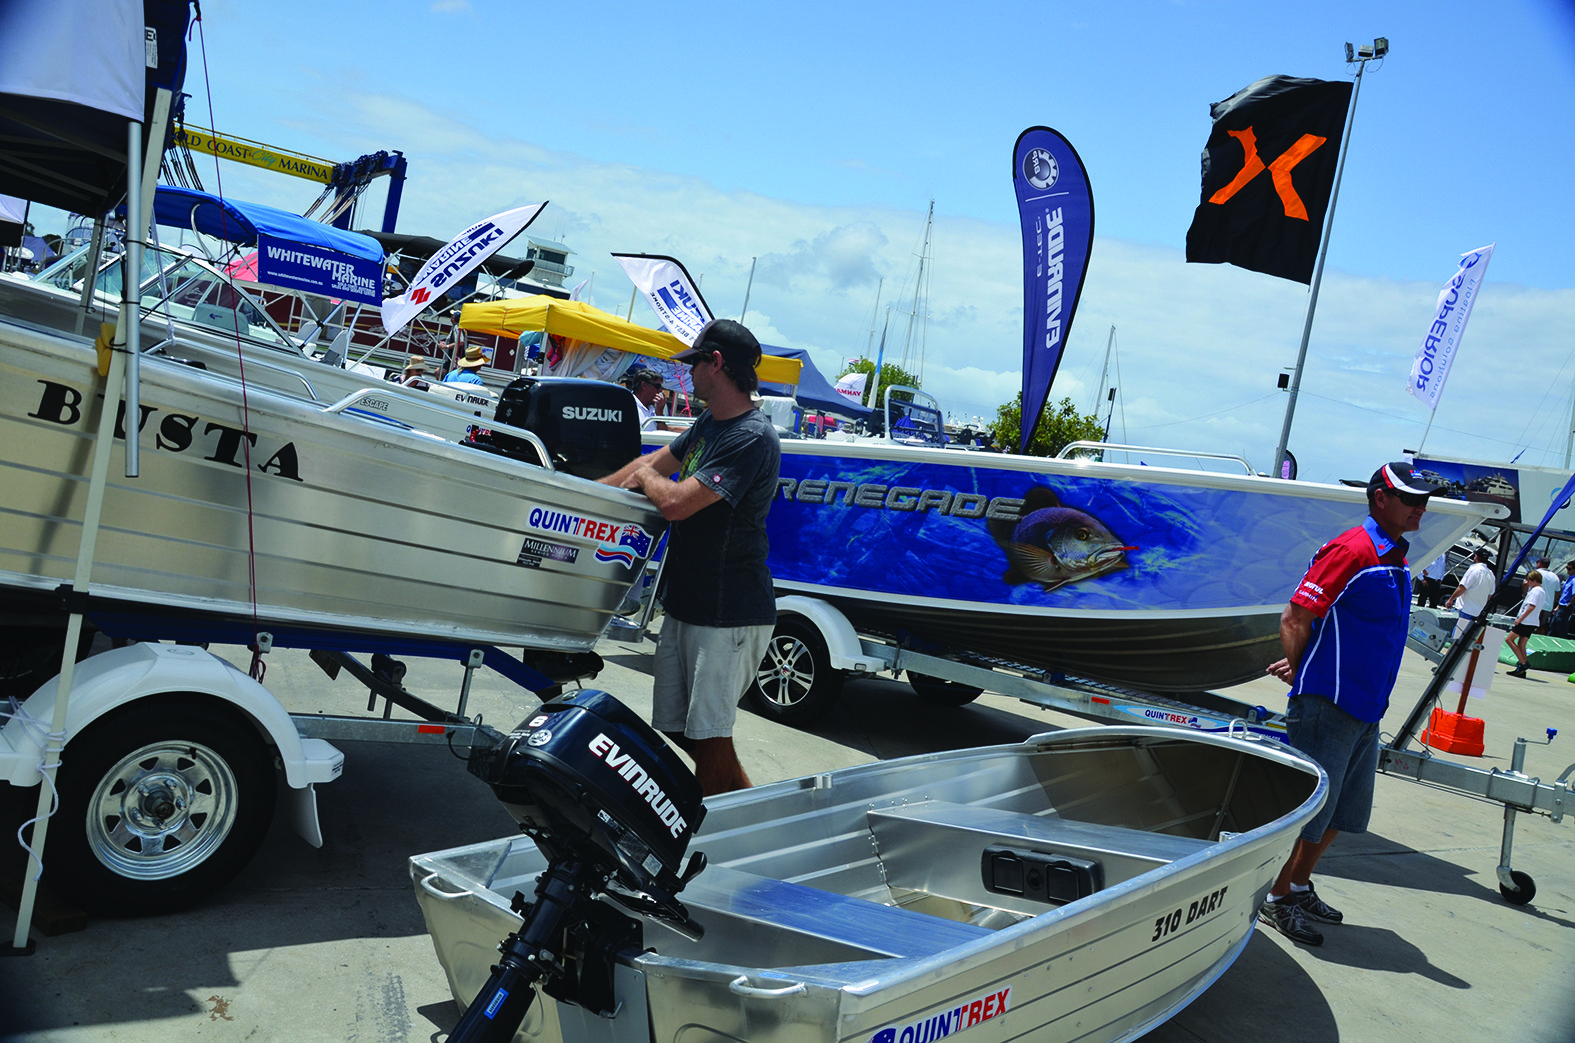 oats built for serious fishing or boats built for serious fun – you will find exactly what you need to get out on the water making special memories your way at Expo 2016.